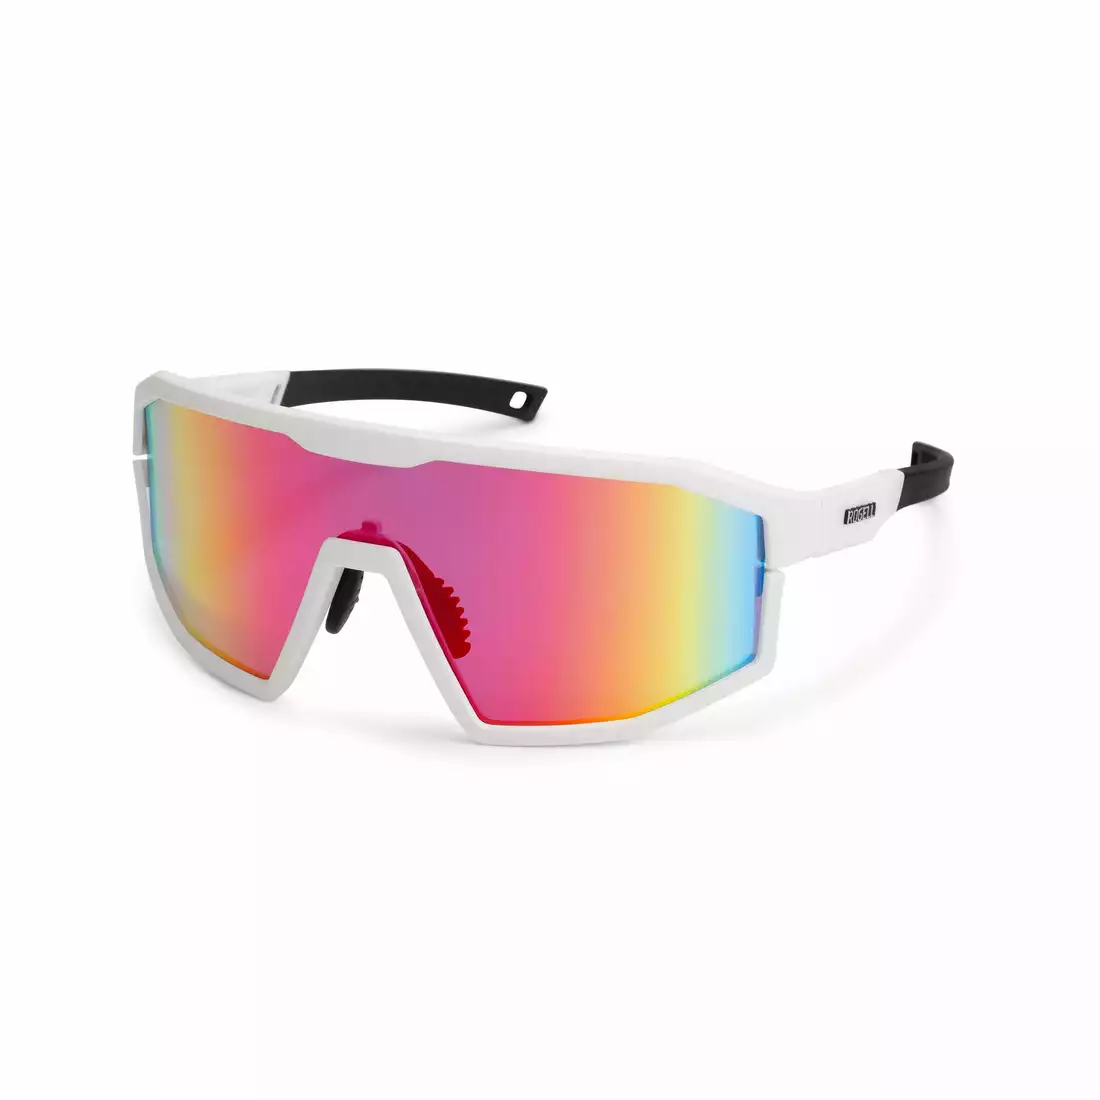 ROGELLI RECON Sports glasses with interchangeable lenses, white